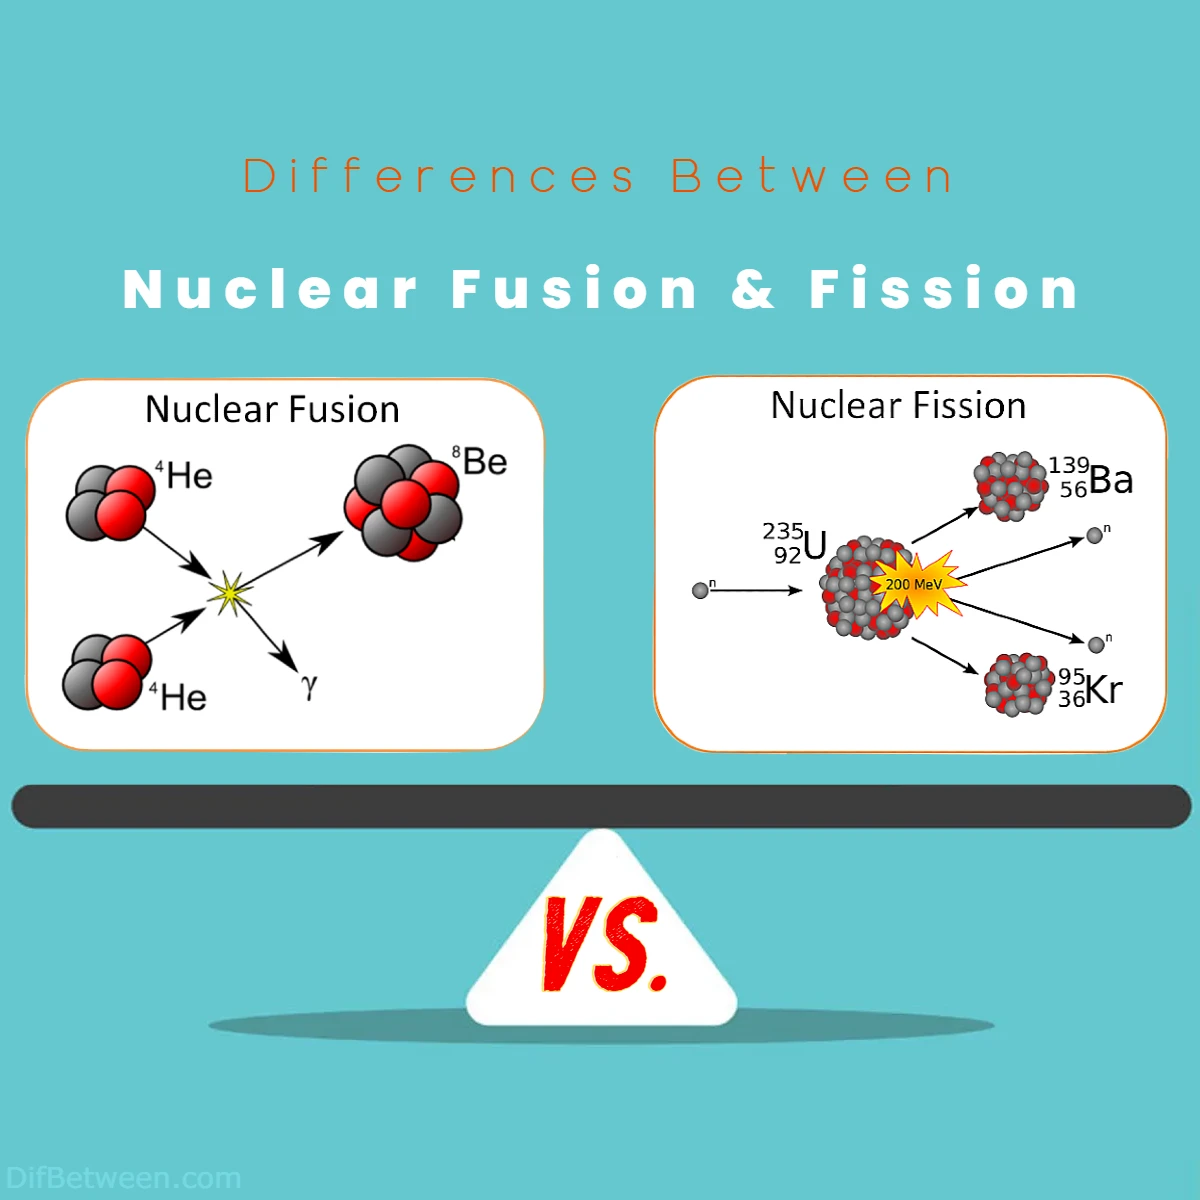 Differences Between Nuclear Fusion vs Fission